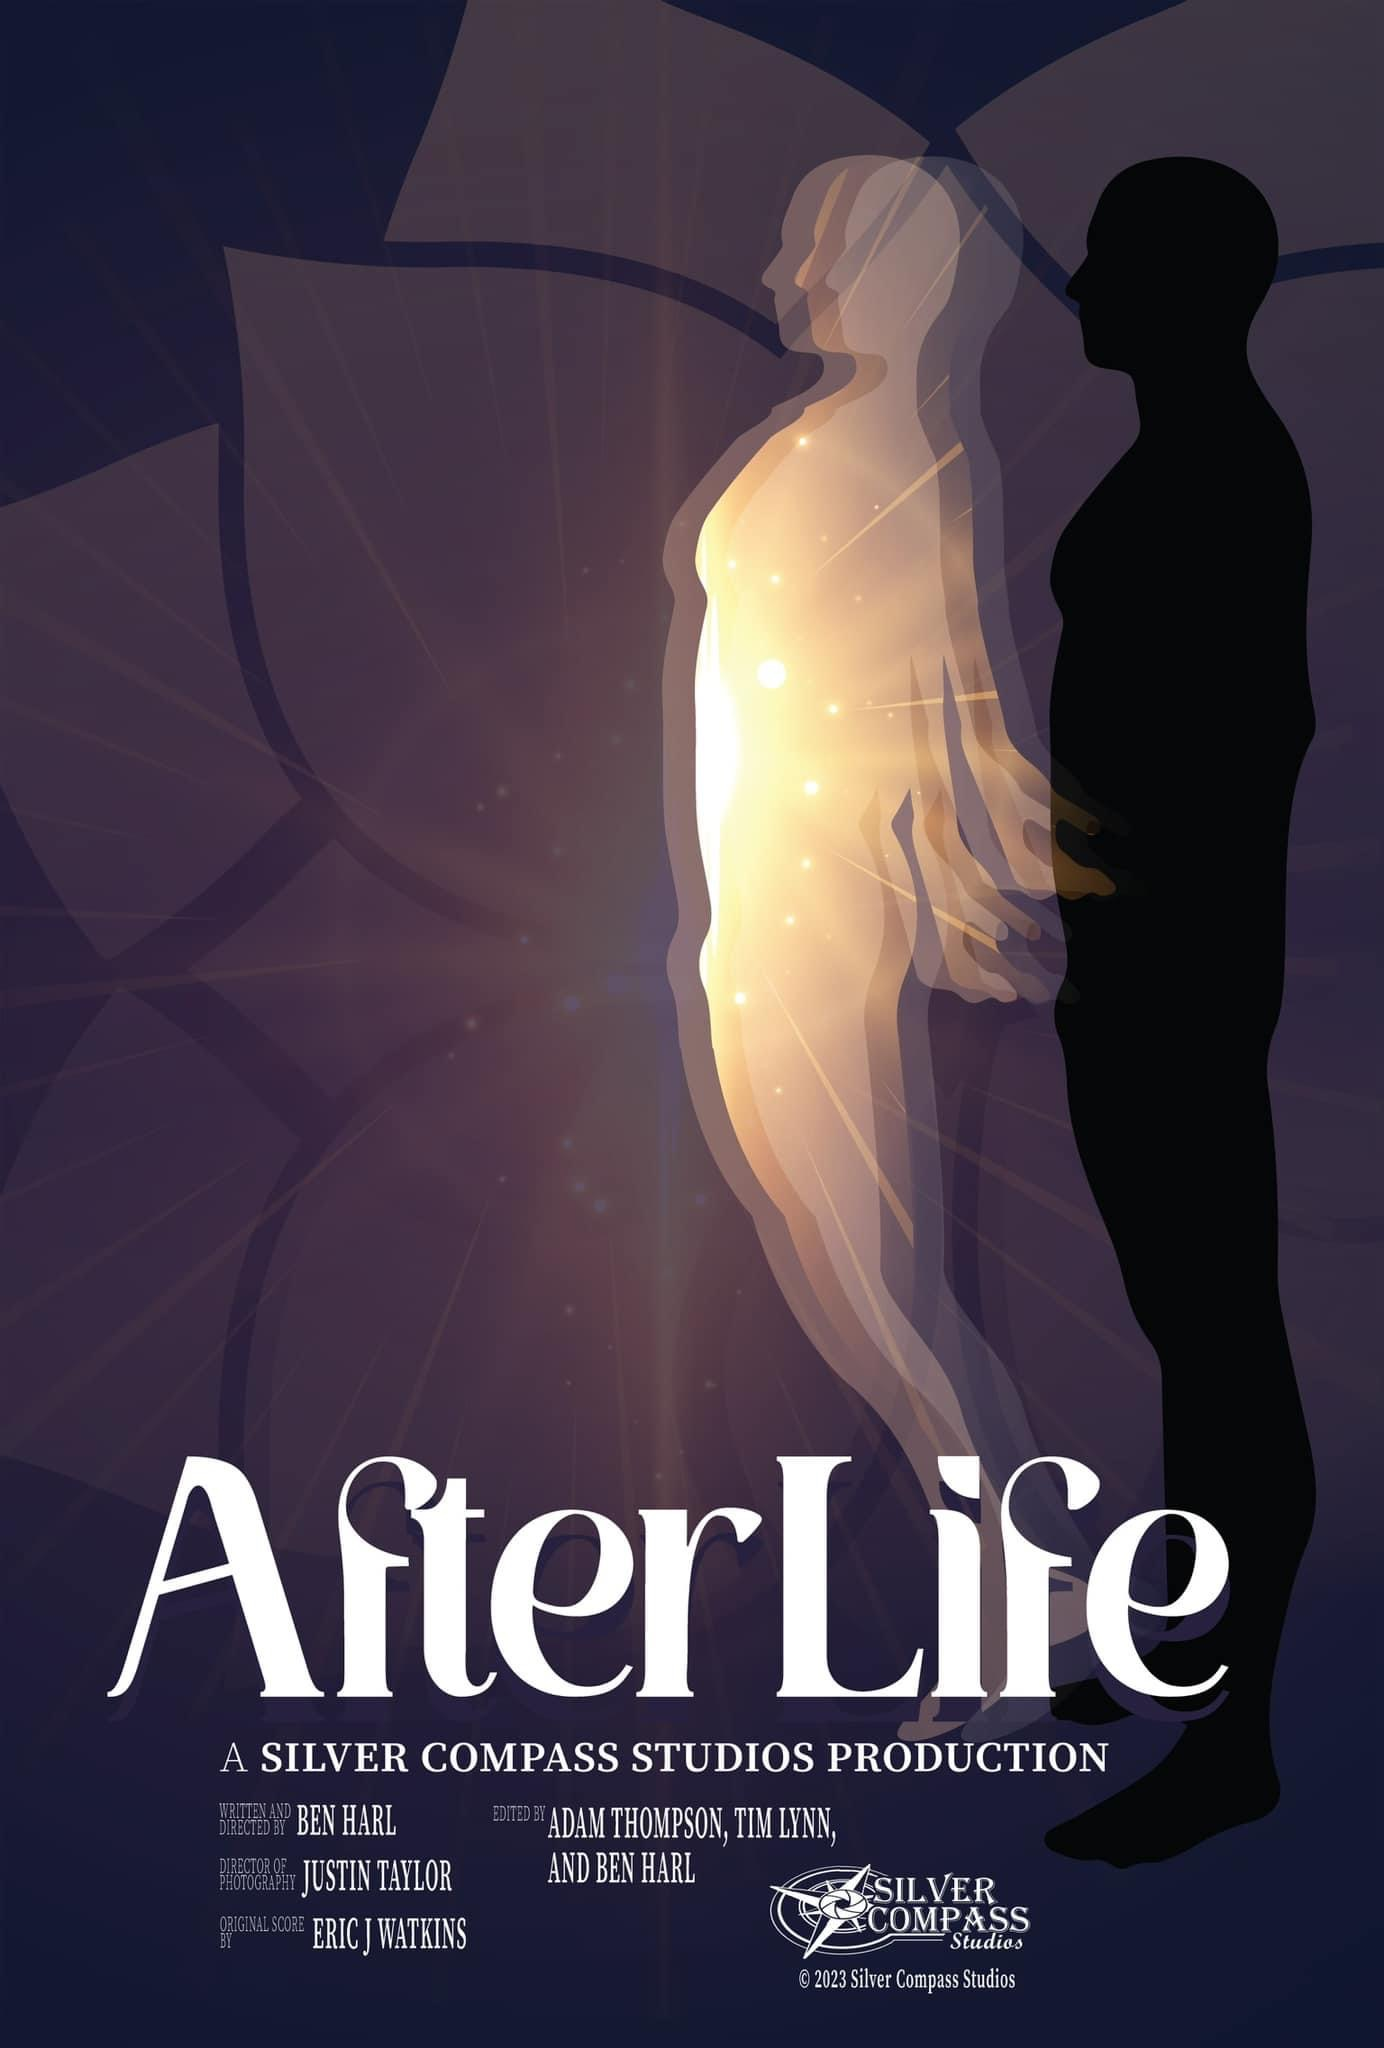 Ben Harl of Silver Compass Studios on AFTERLIFE